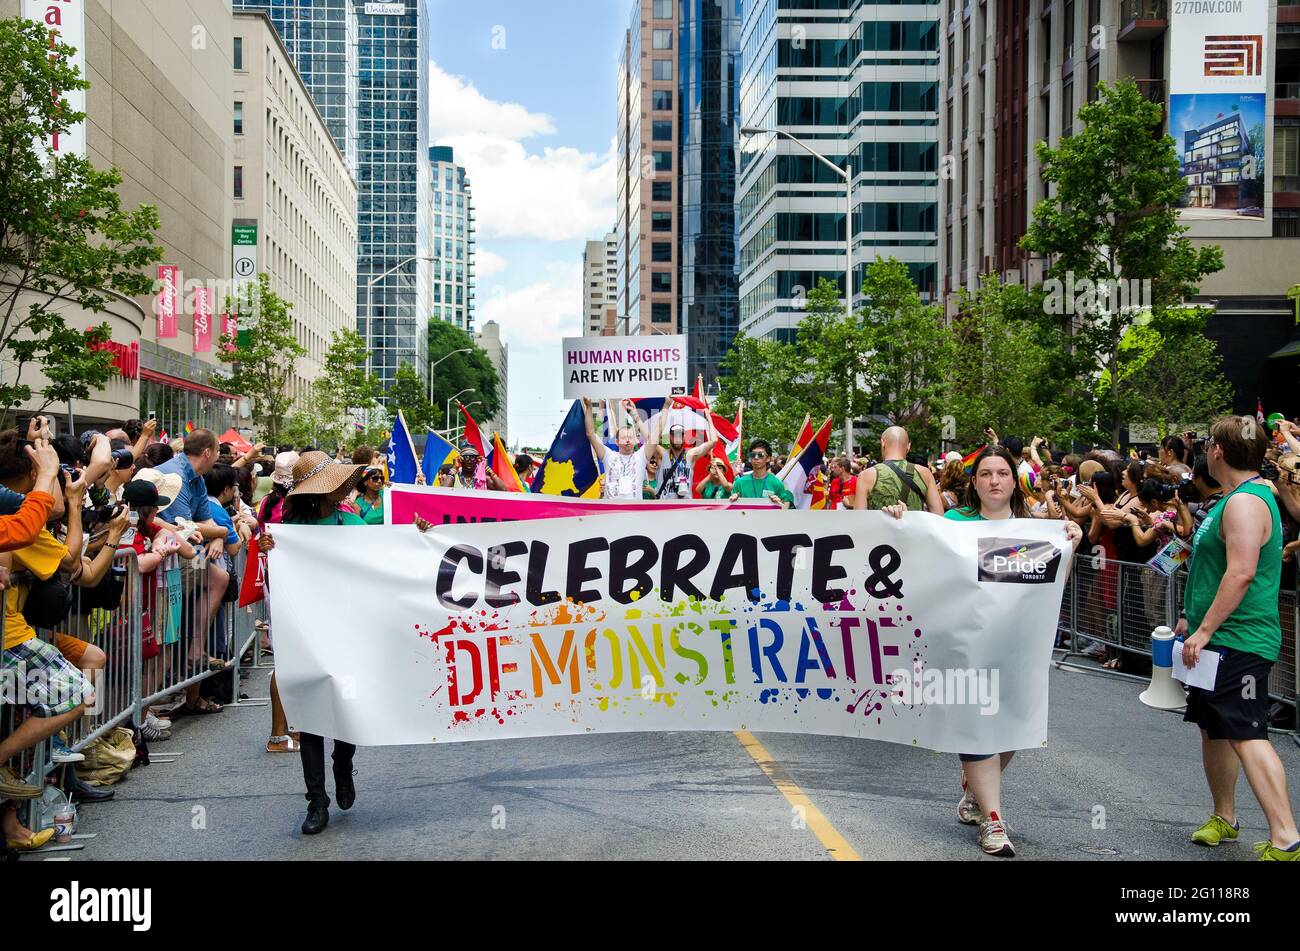 Marchers with flags and banners at pride parade in Toronto, pass through the street as crowds of spectators cheer from the sidelines Stock Photo